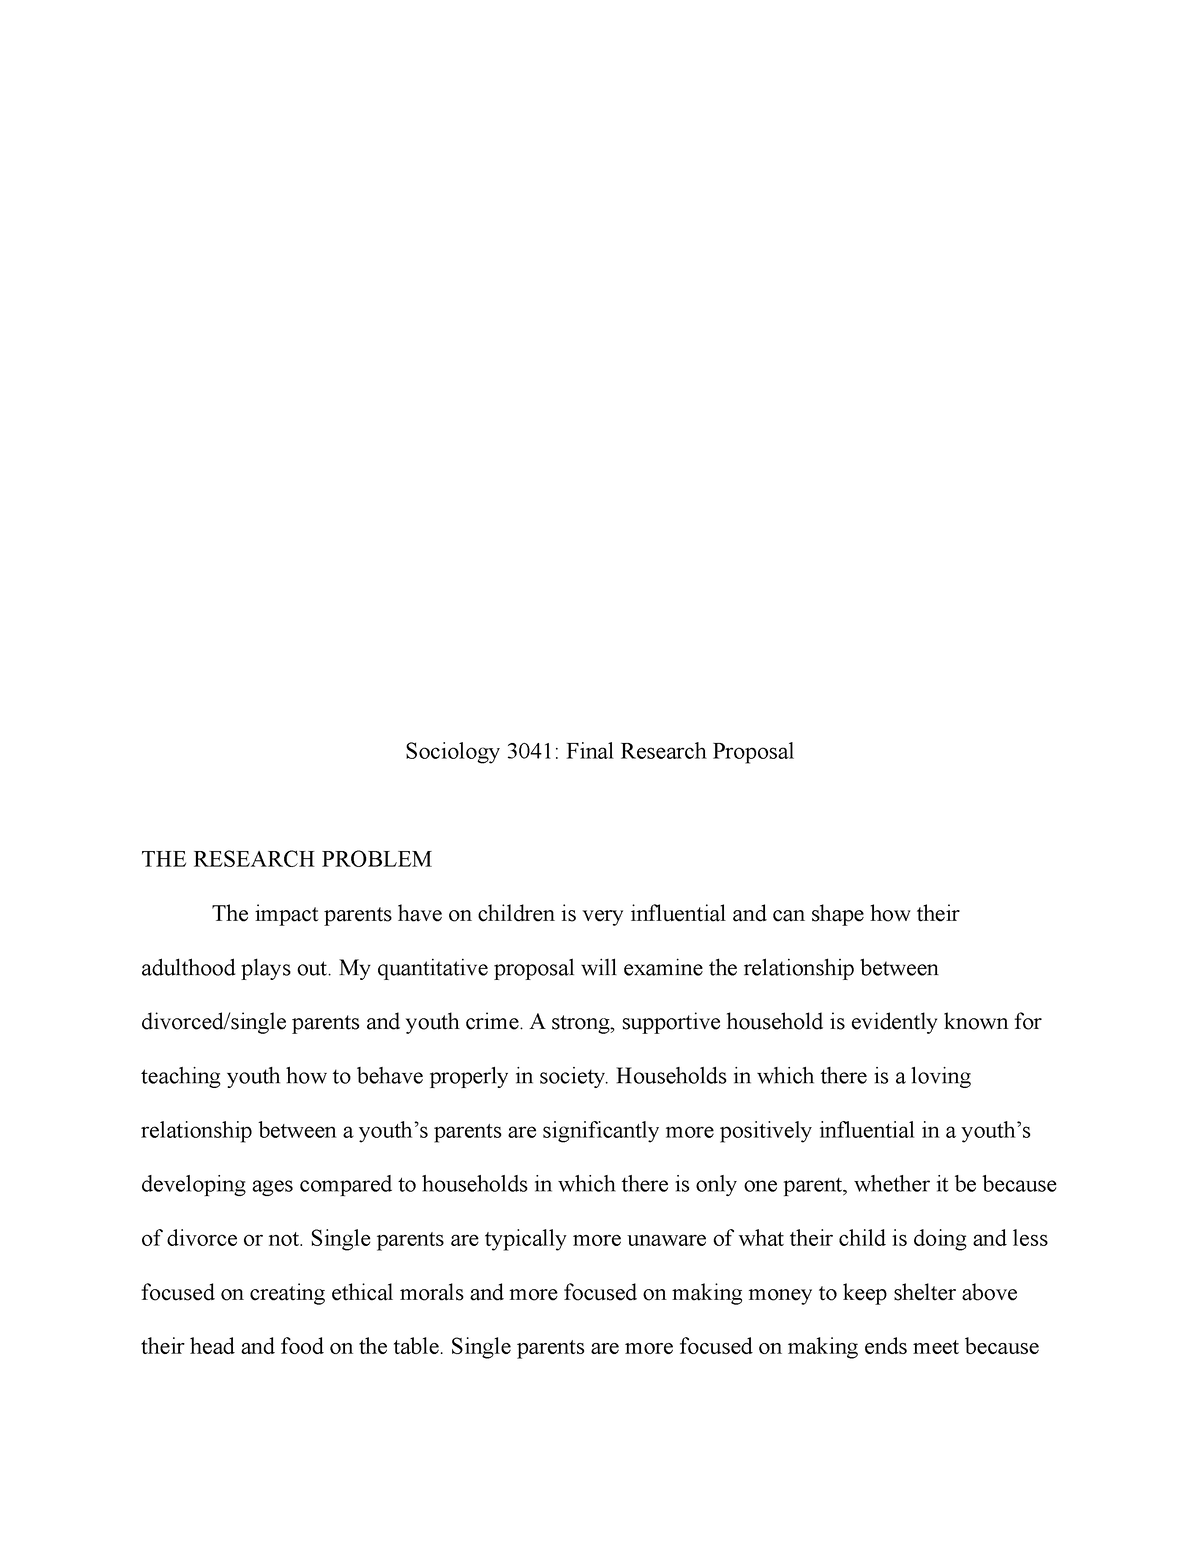 research proposal sociology